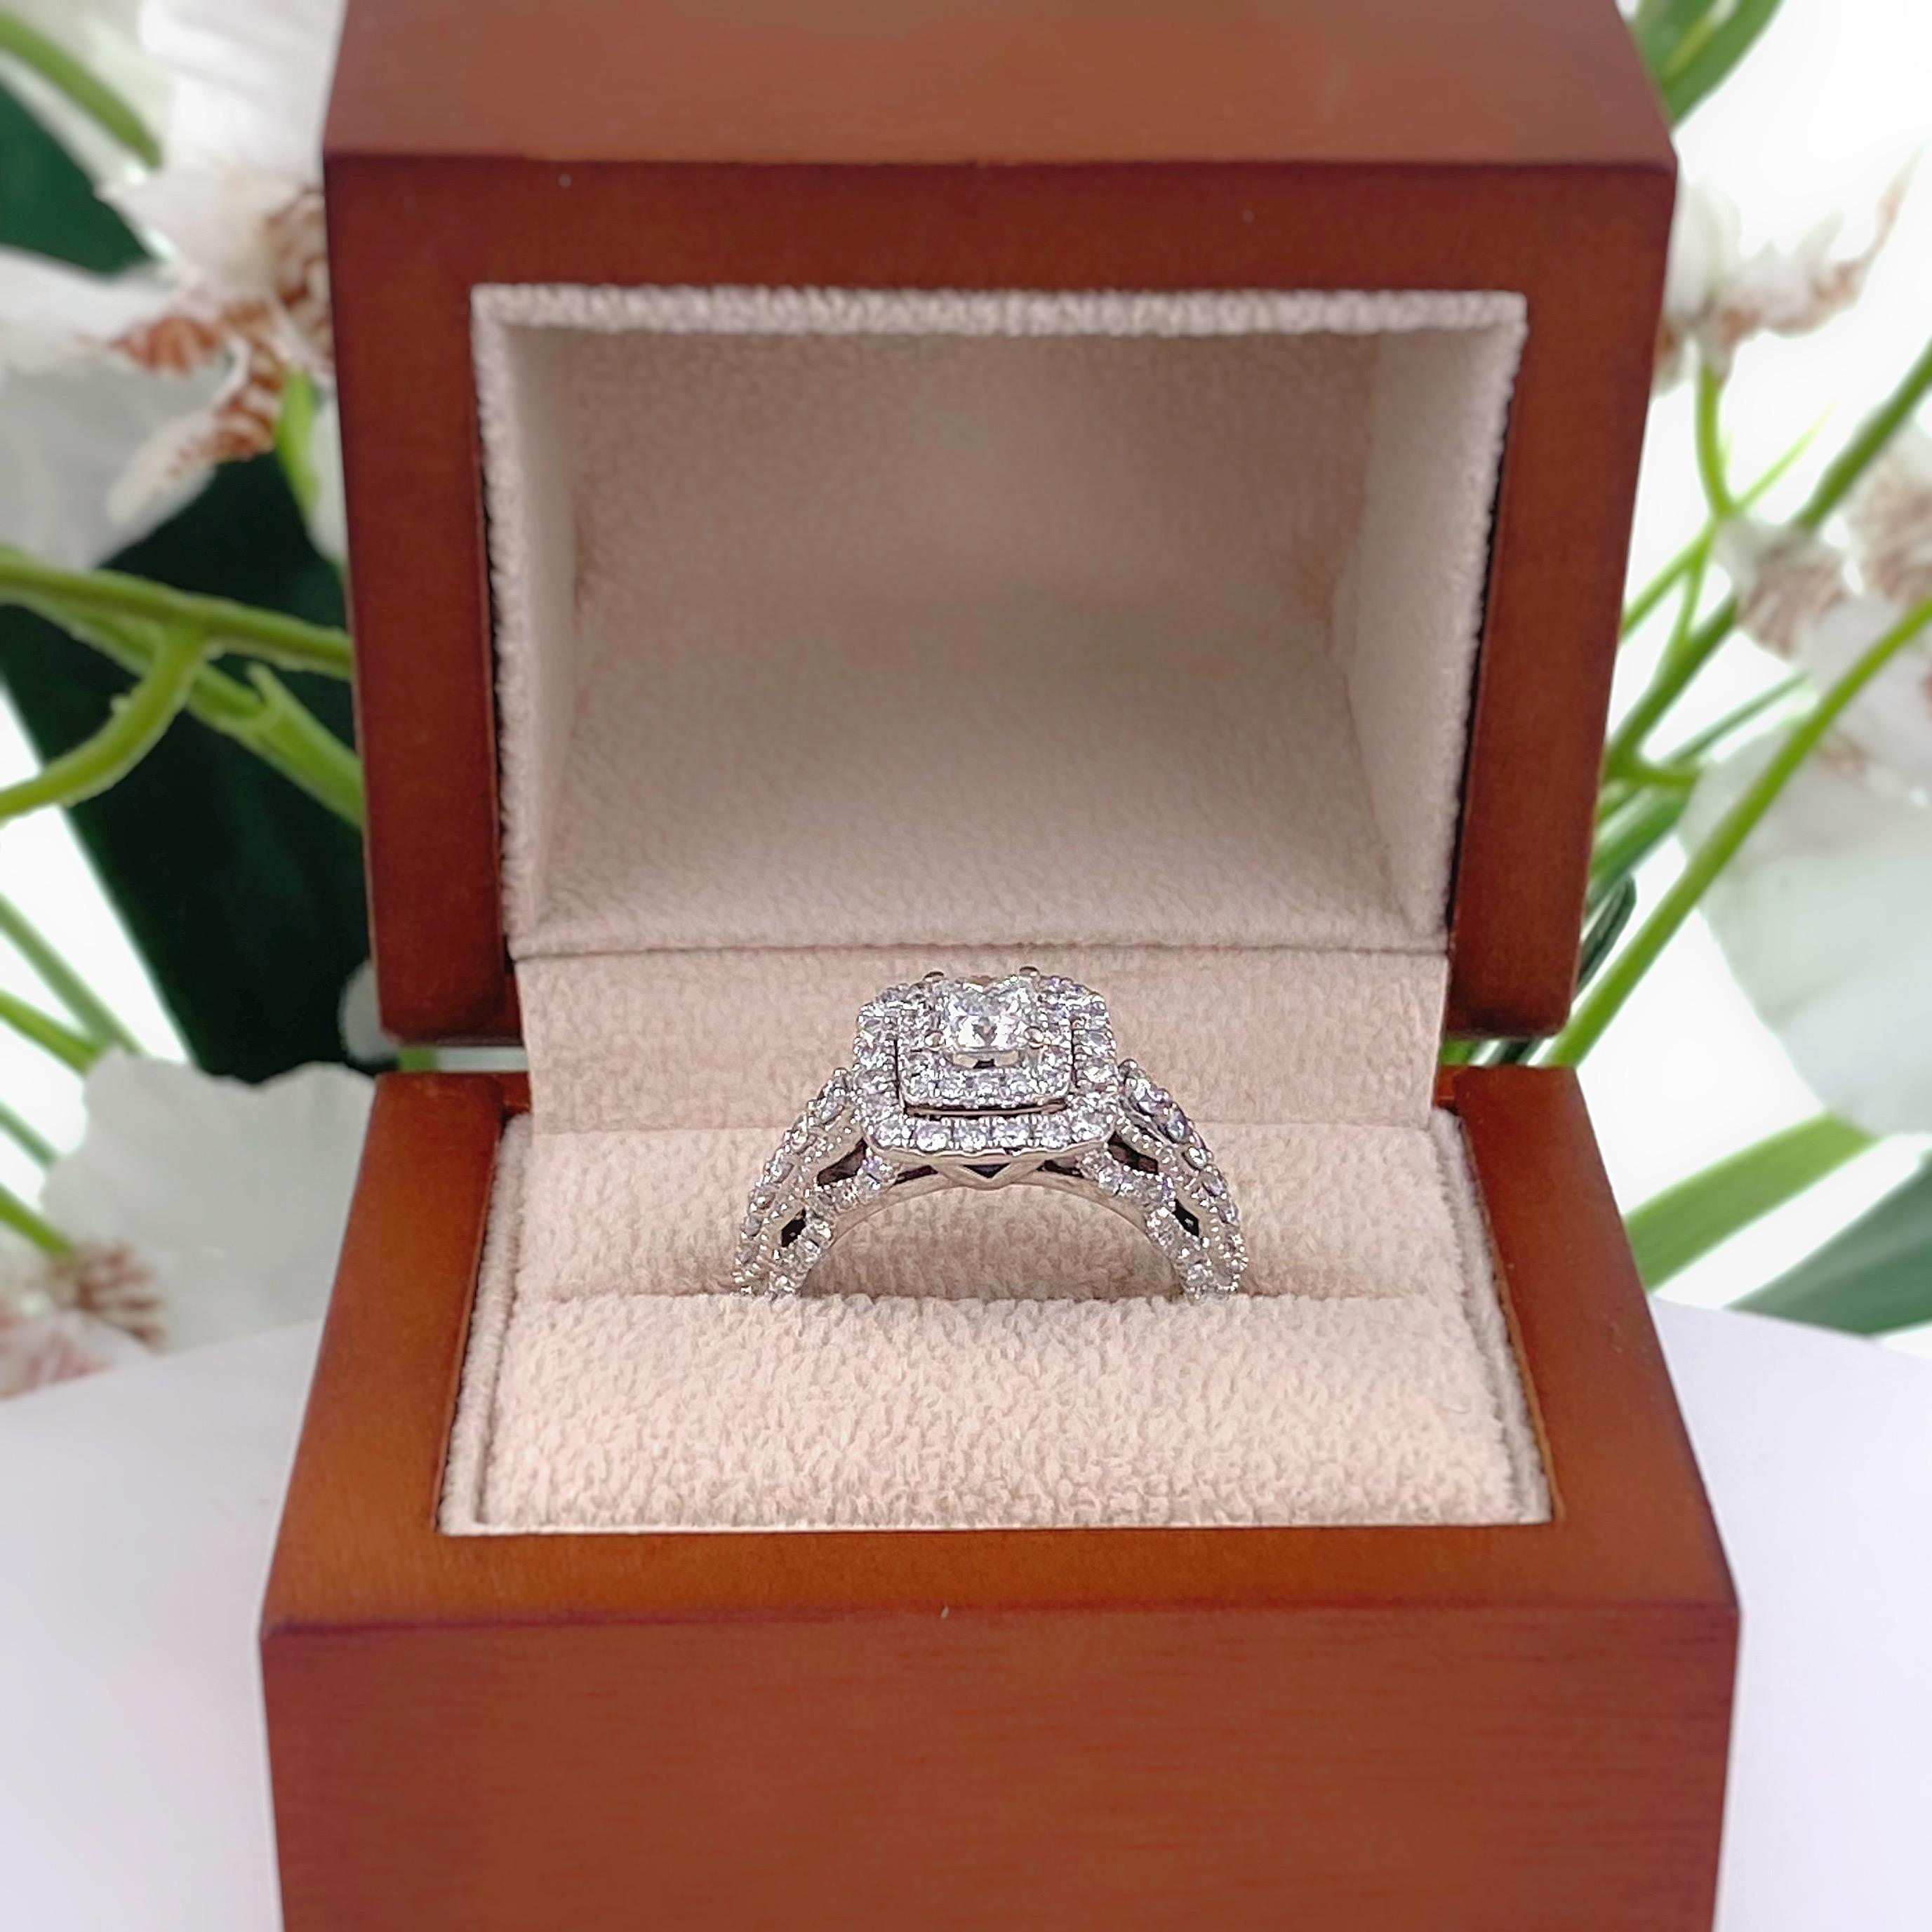 Vera Wang LOVE Princess Diamond Engagement Ring
Style:  Double Halo
Metal:  14kt White Gold
Size:  7 sizable
TCW:  1.32 tcw / 1 1/3 tcw
Main Diamond:   Princess Cut Diamond. 0.45 cts
Color & Clarity:  I, I1
Accent Diamonds:   96 Round Brilliant